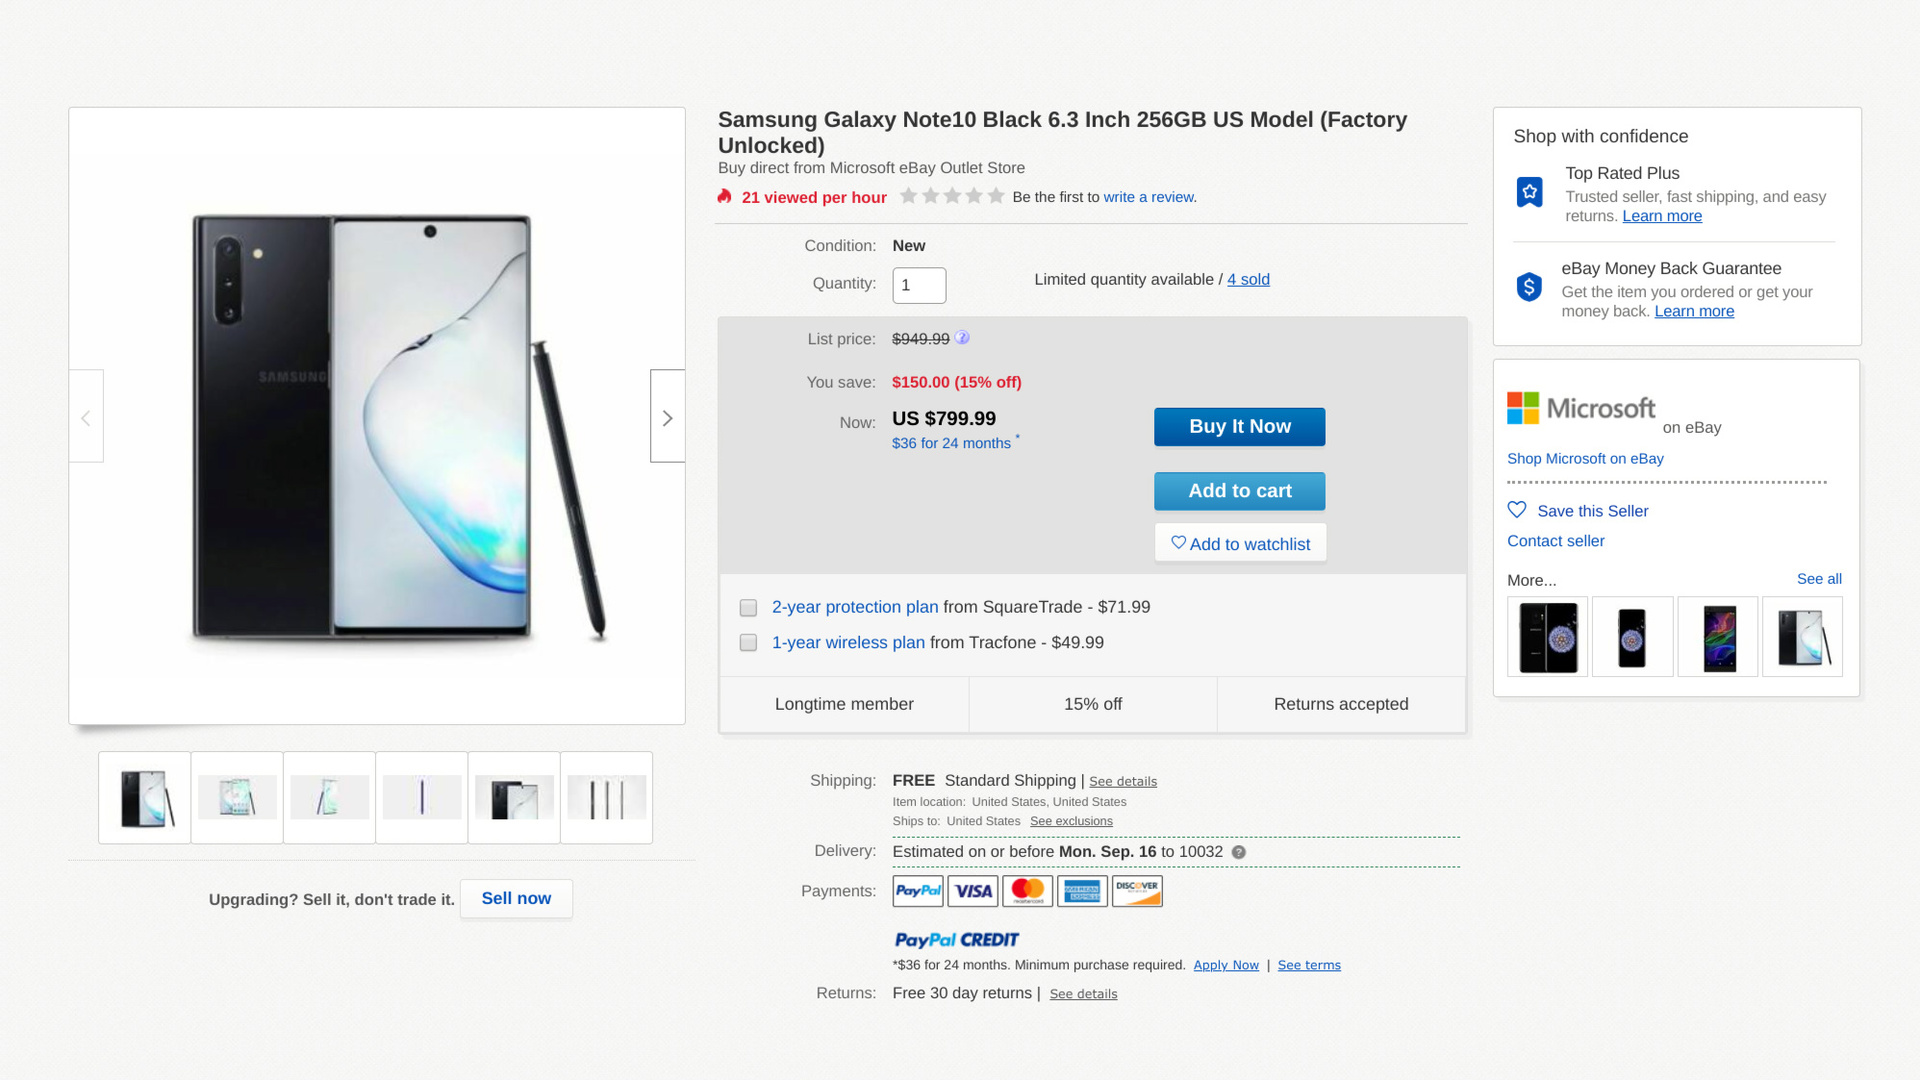 Deal on the Samsung Galaxy Note 10 on eBay